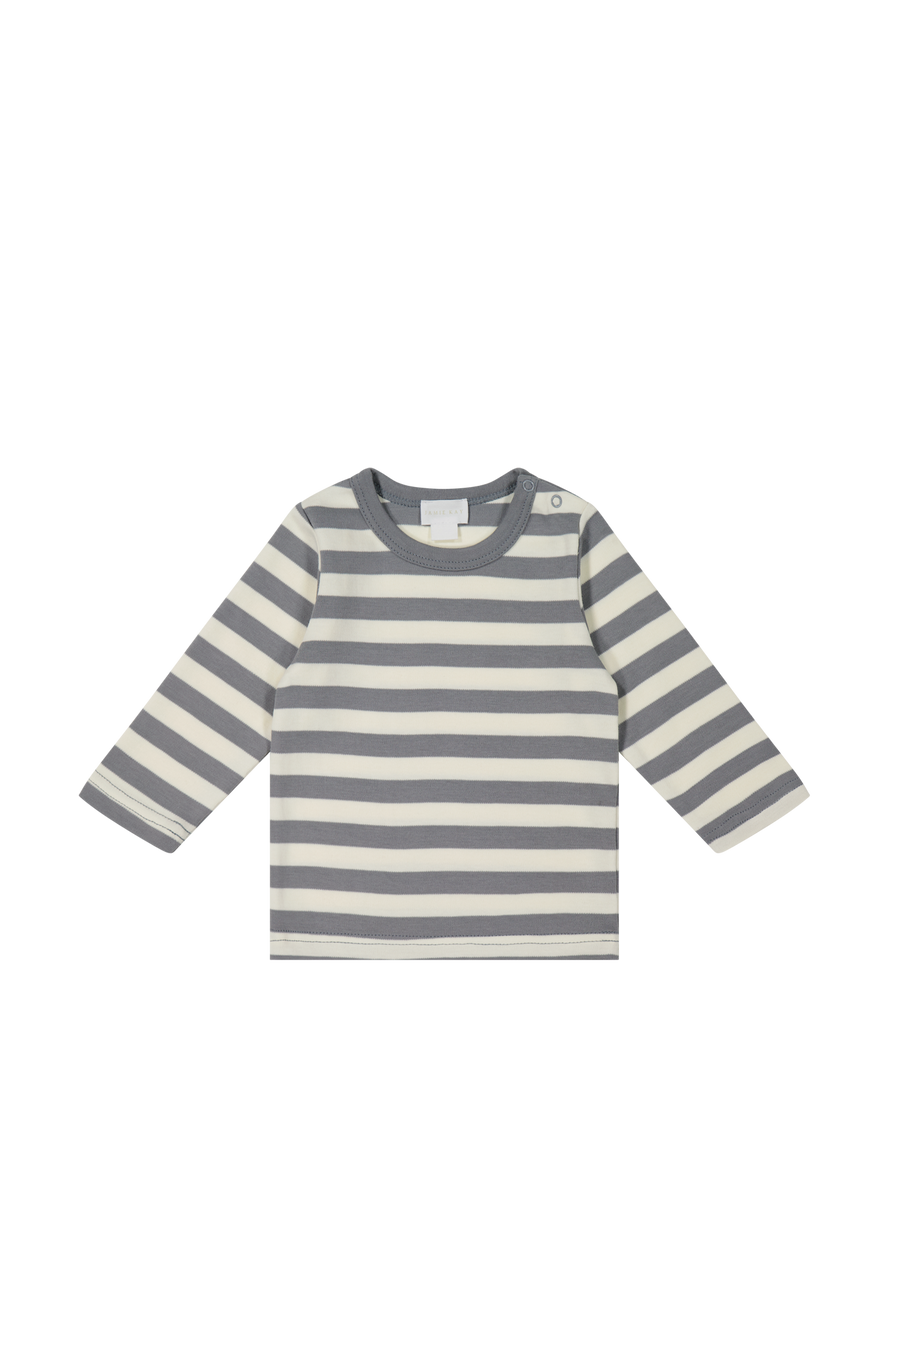 Pima Cotton Vinny Long Sleeve Top - Olive Stripe Childrens Top from Jamie Kay NZ